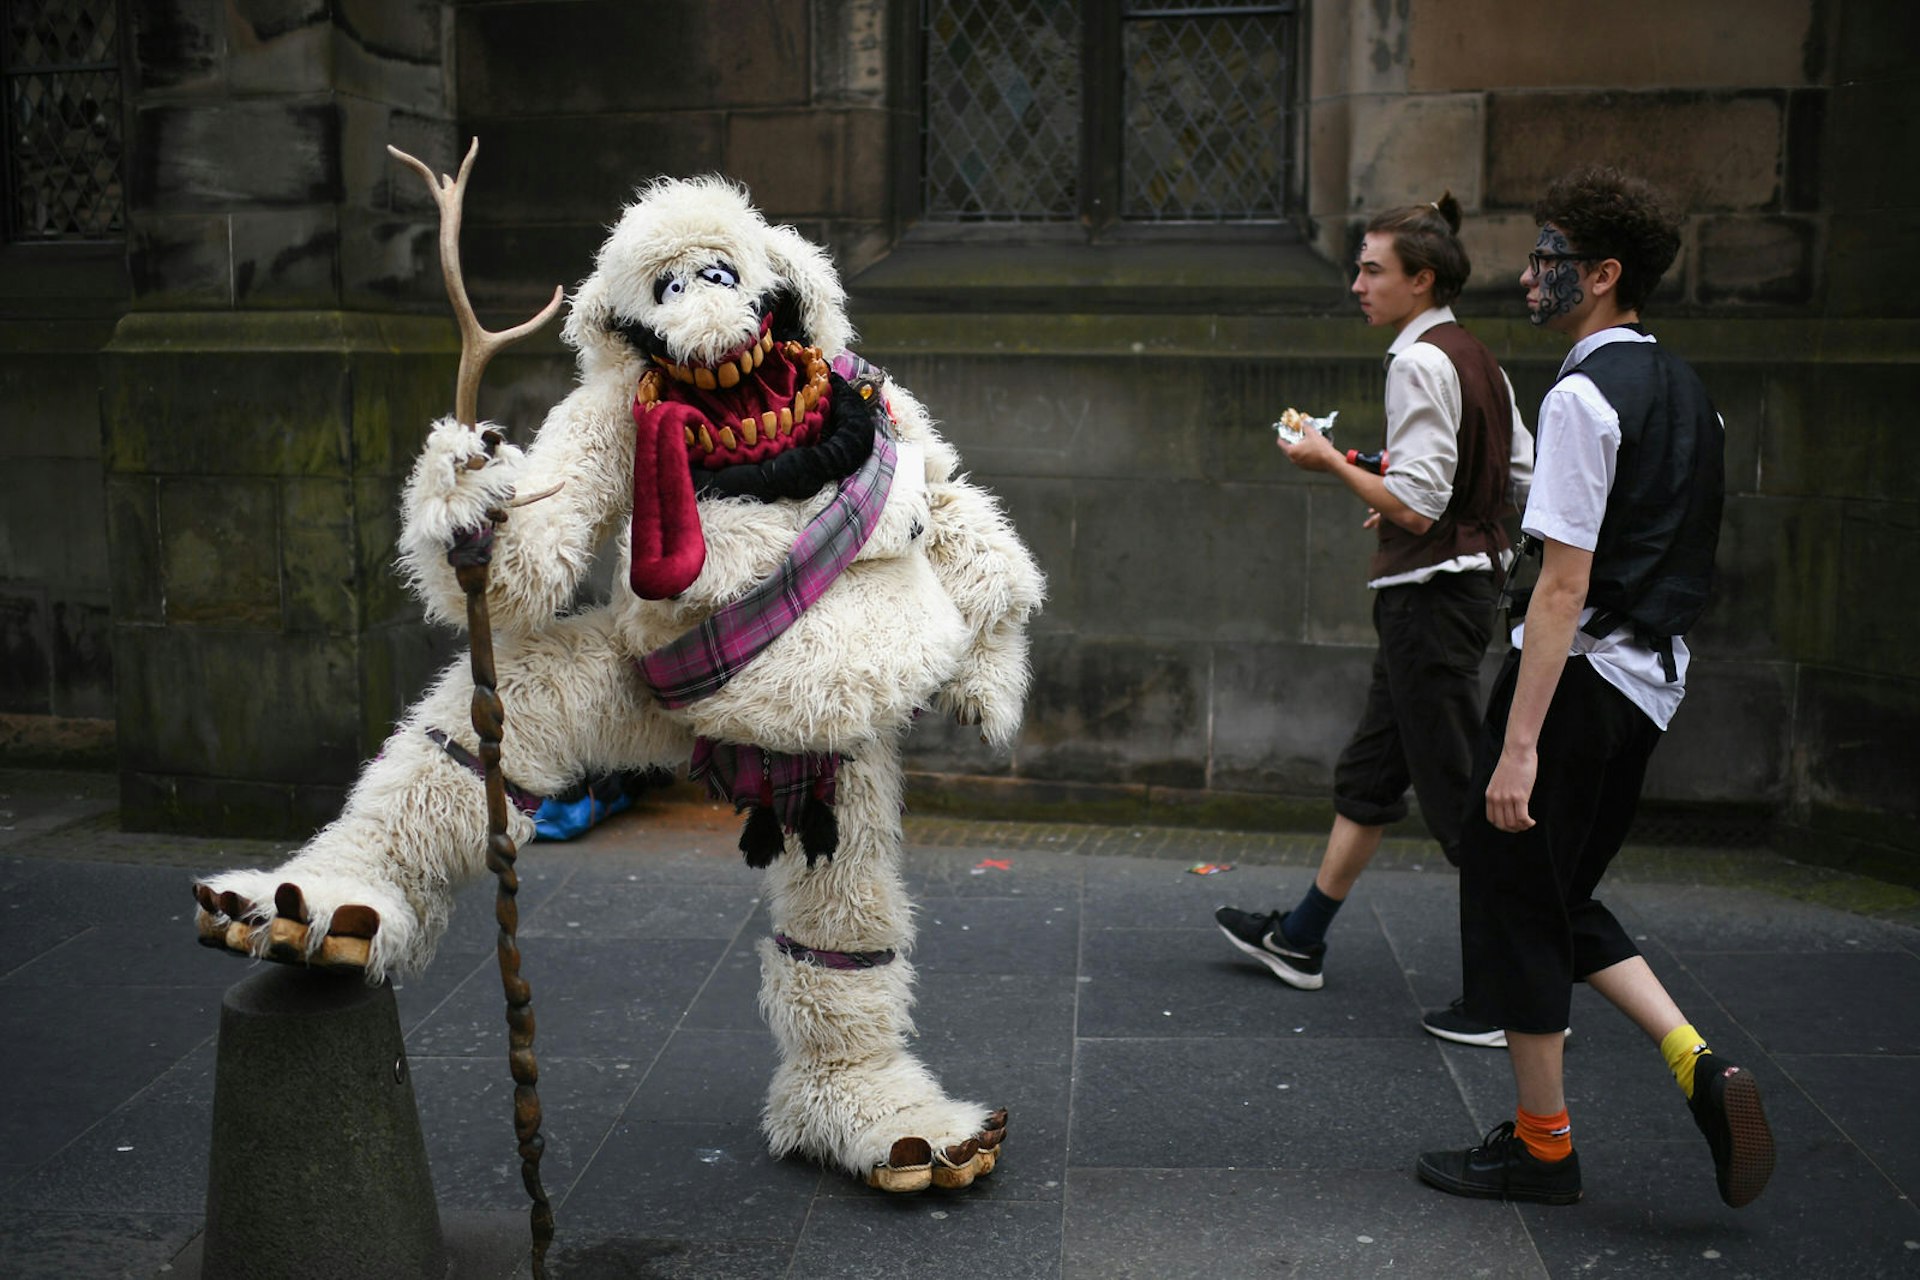 Edinburgh Festival Fringe entertainers perform on the Royal Mile. A person in an oversized white yeti costume with a tartan sash and holding a staff props their leg up on a bollard while two men walk by. 